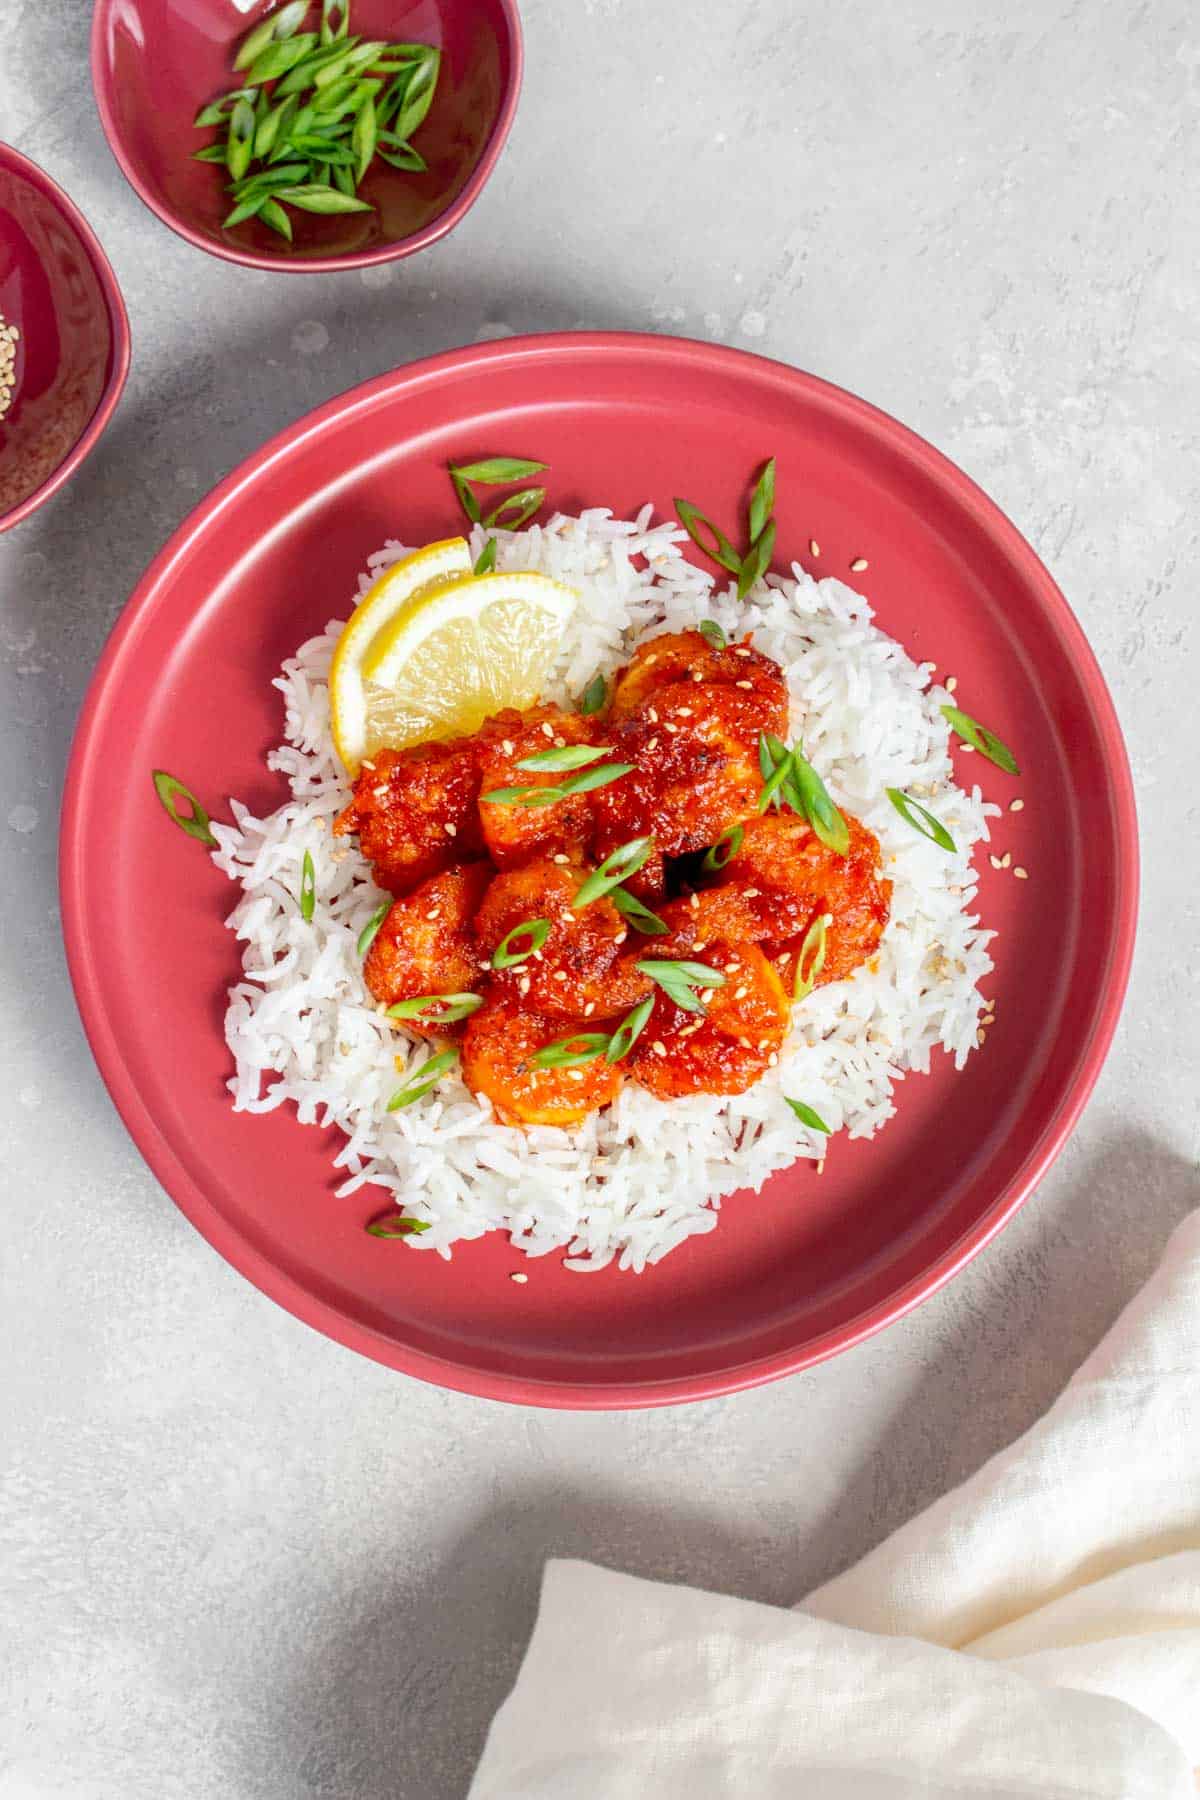 A plate of gochujang shrimp over rice with sliced lemon triangles.